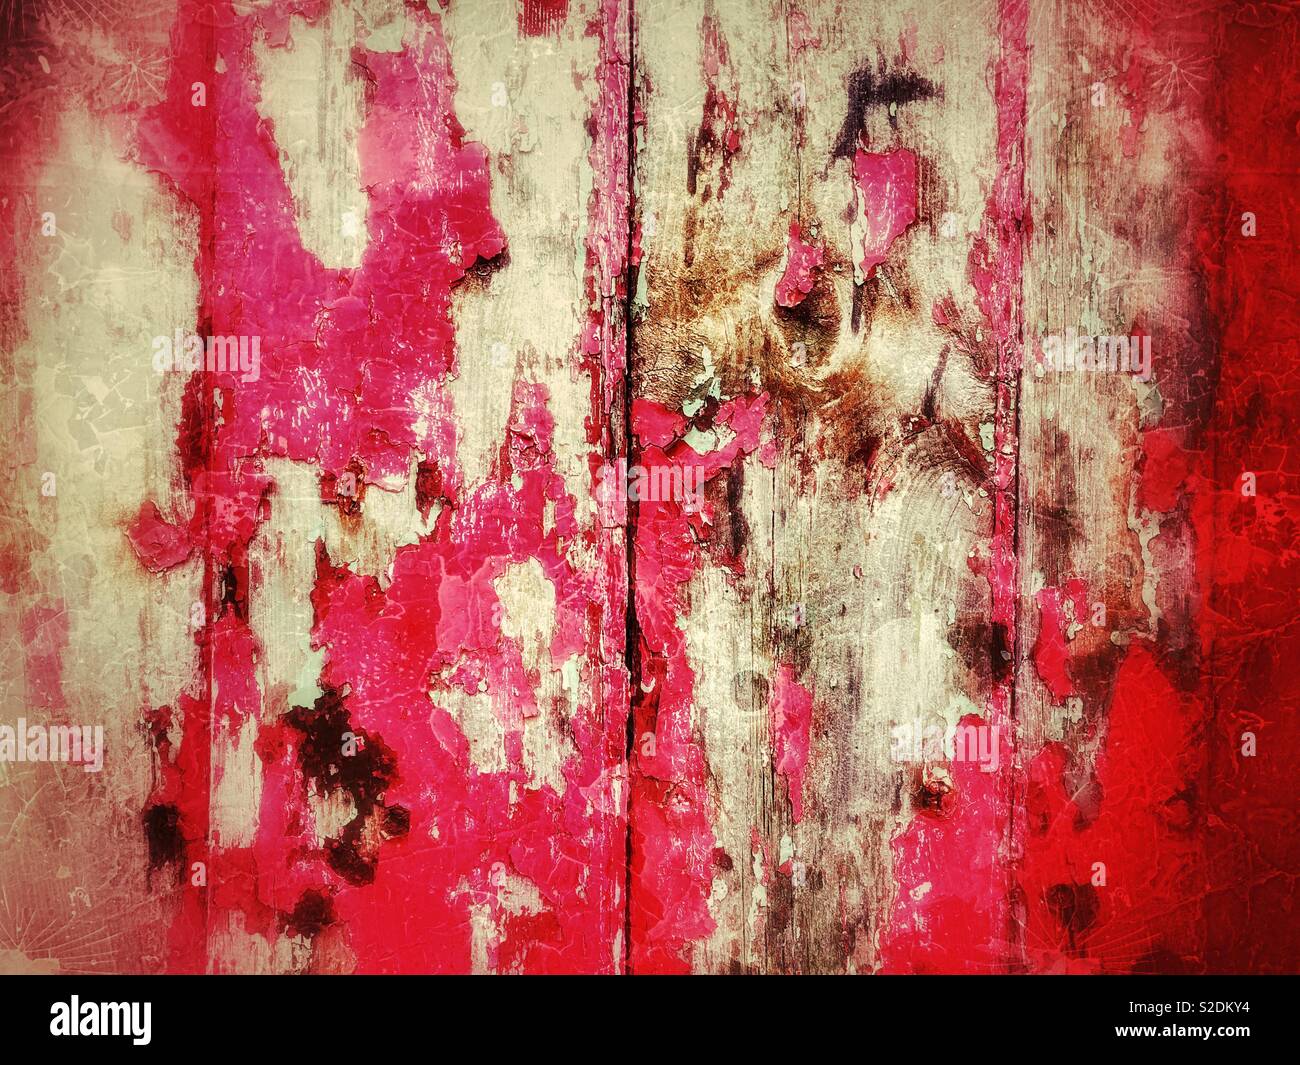 Faded peeling red paint on an old wooden door. Stock Photo